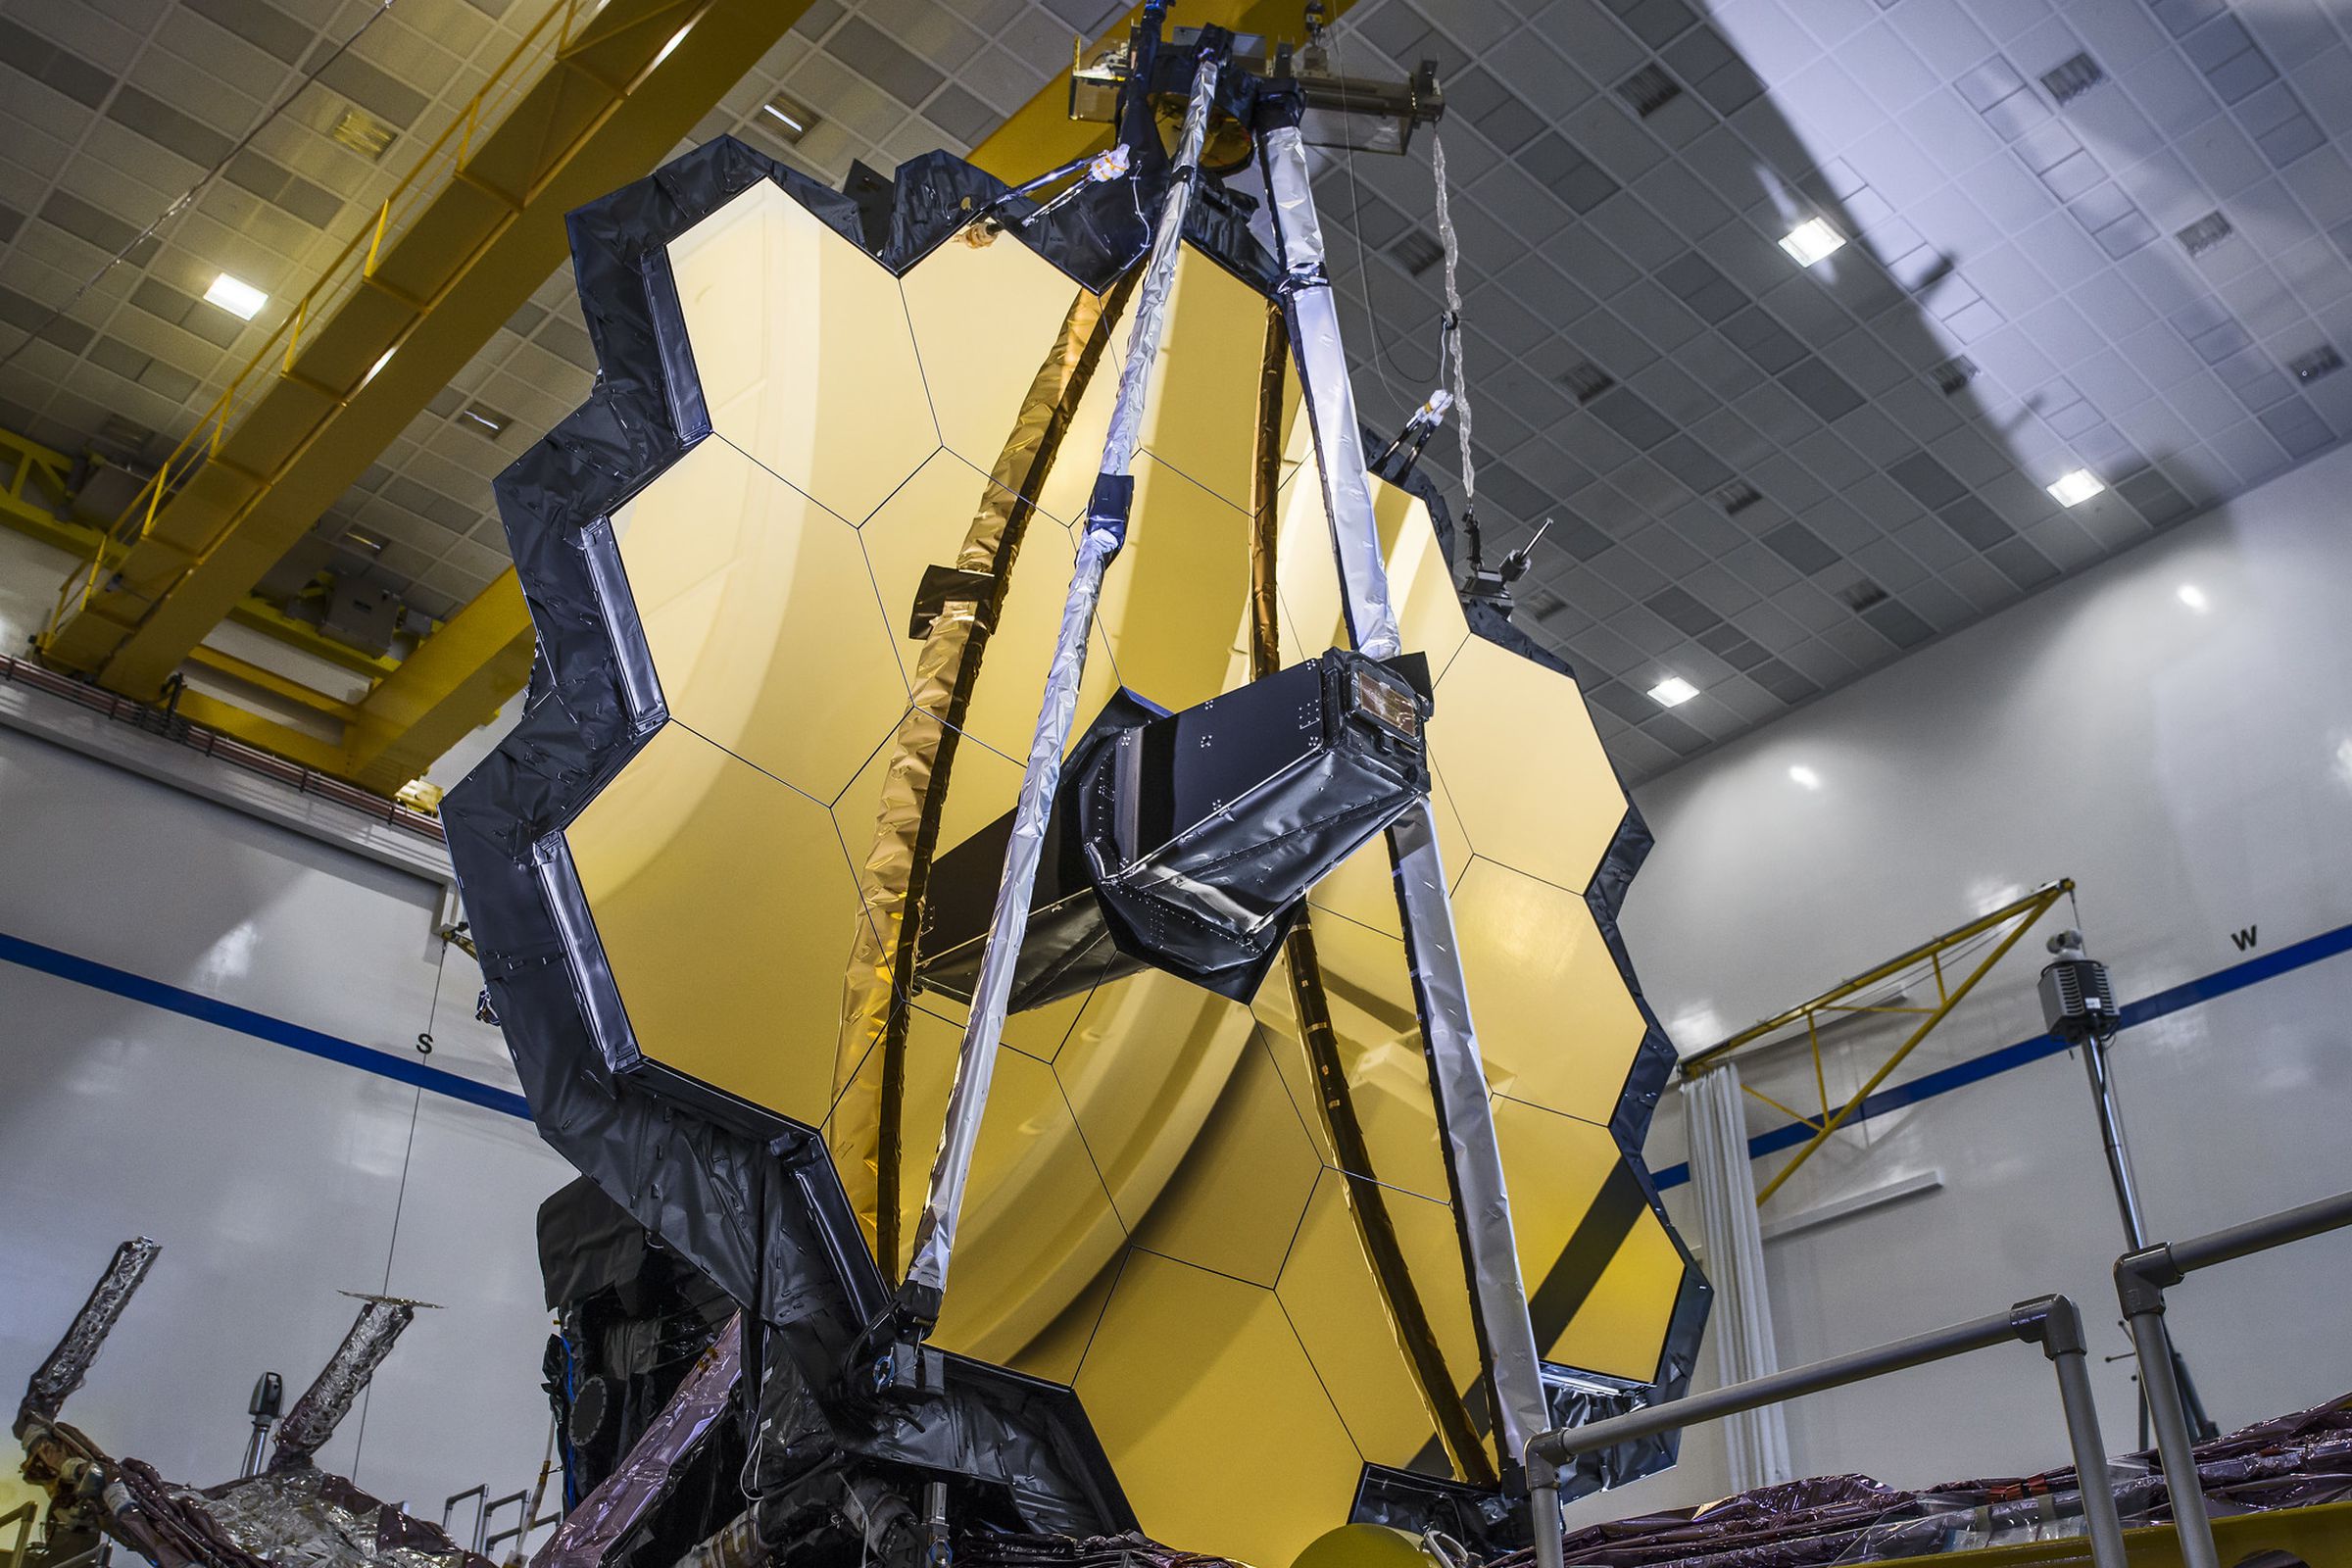 JWST’s primary mirror on Earth before it launched